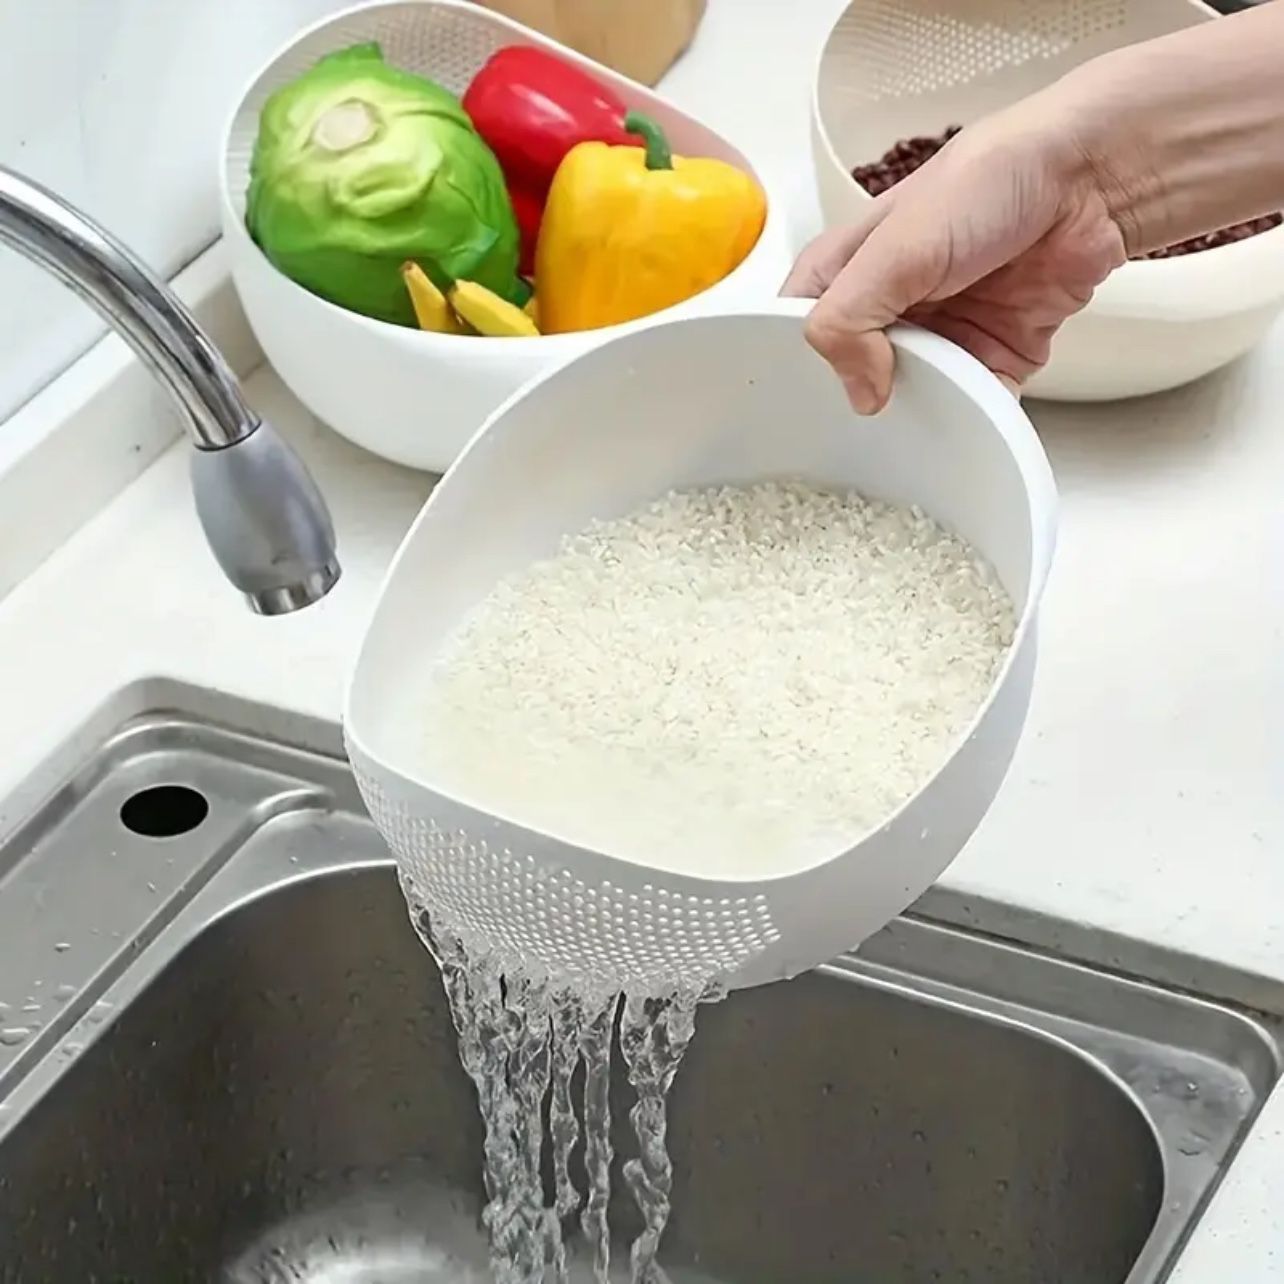 1pc, Plastic Rice Washing Bowl With Strainer - Efficiently Wash Small Grains And Kitchen Gadgets